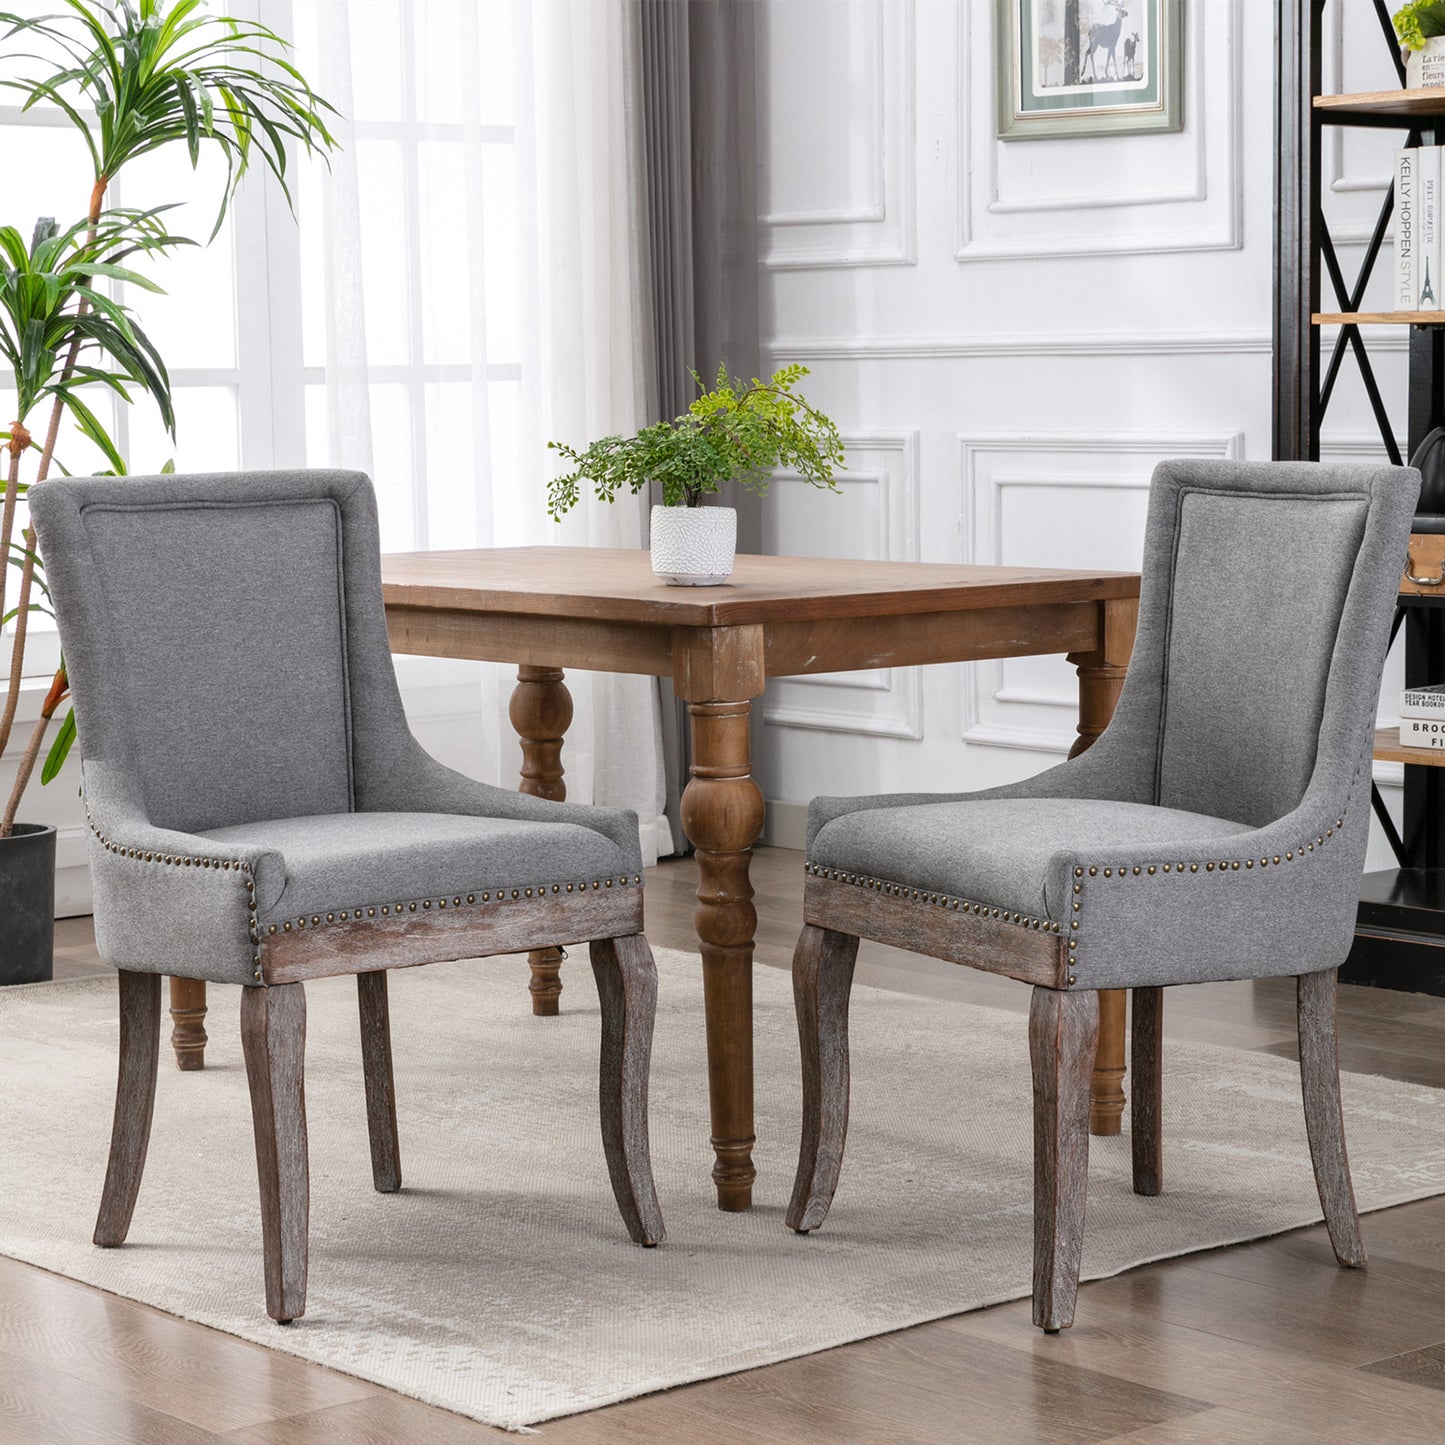 SYNGAR Upholstered Thickened Fabric Dining Chairs Set of 2, Solid Wood Contemporary Kitchen Chairs for Dining Room, Accent Chairs with Nail Head Decor, Gray